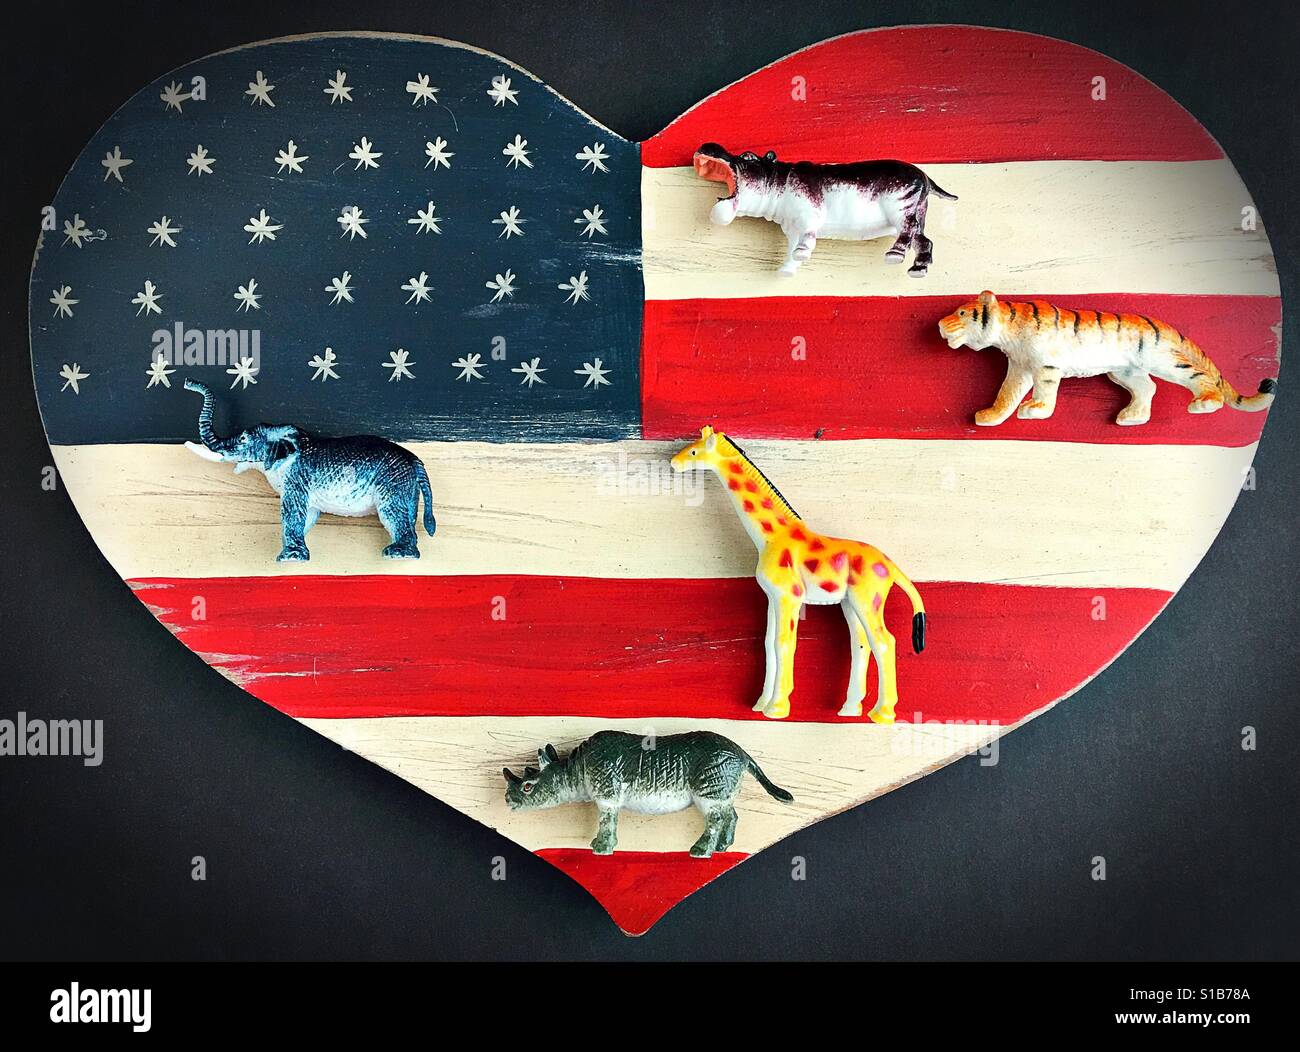 Wild exotic animals on a heart shaped American flag. Stock Photo